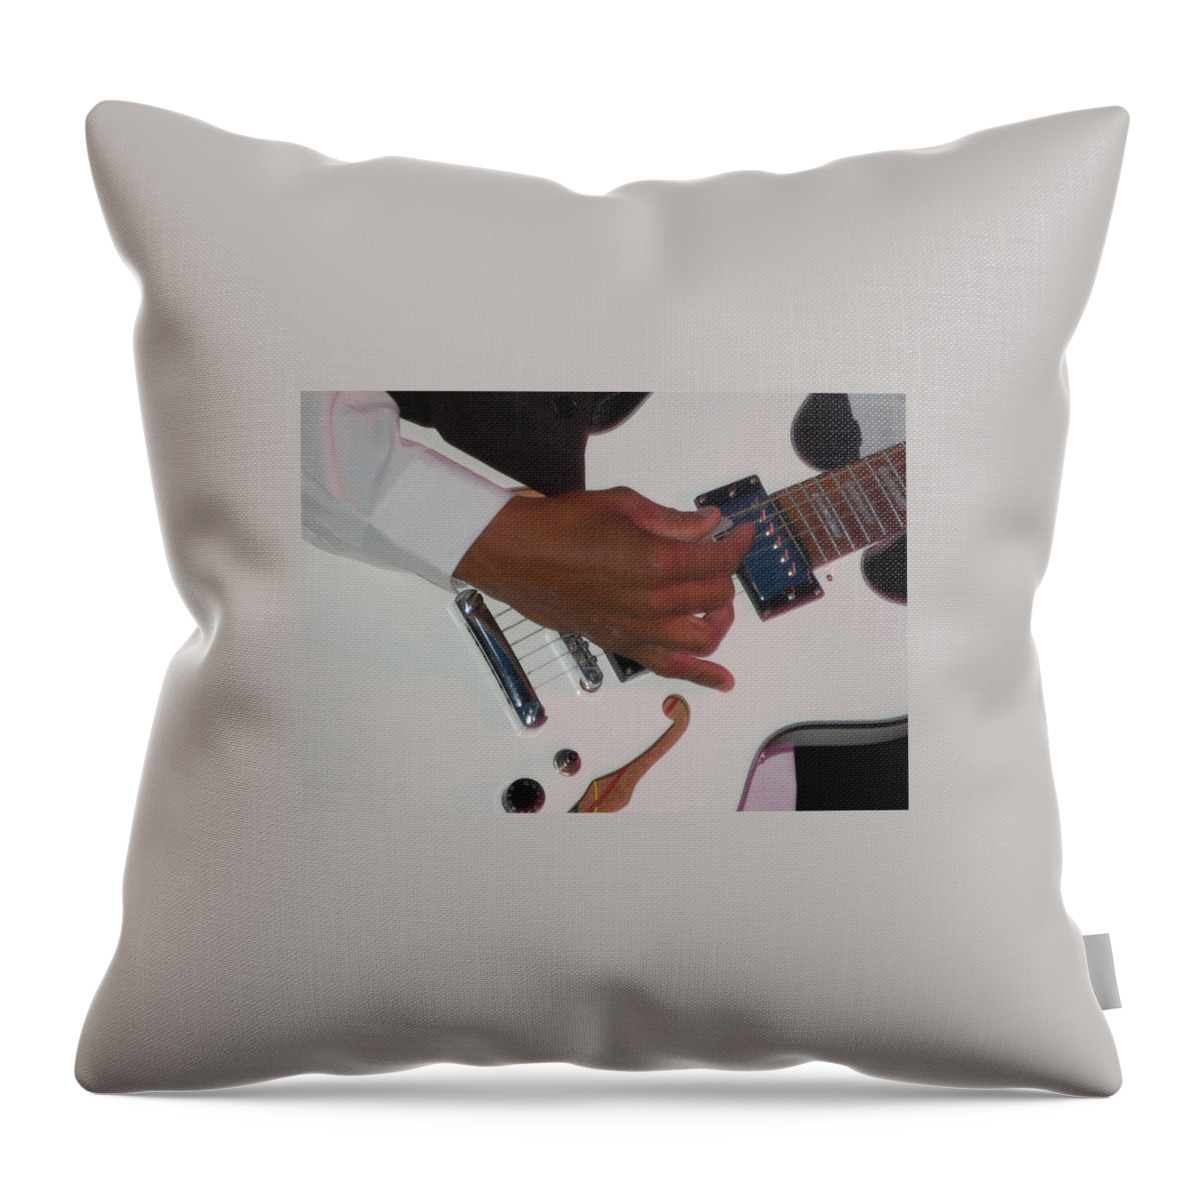 Stroking Throw Pillow featuring the photograph Stroking by Leticia Latocki